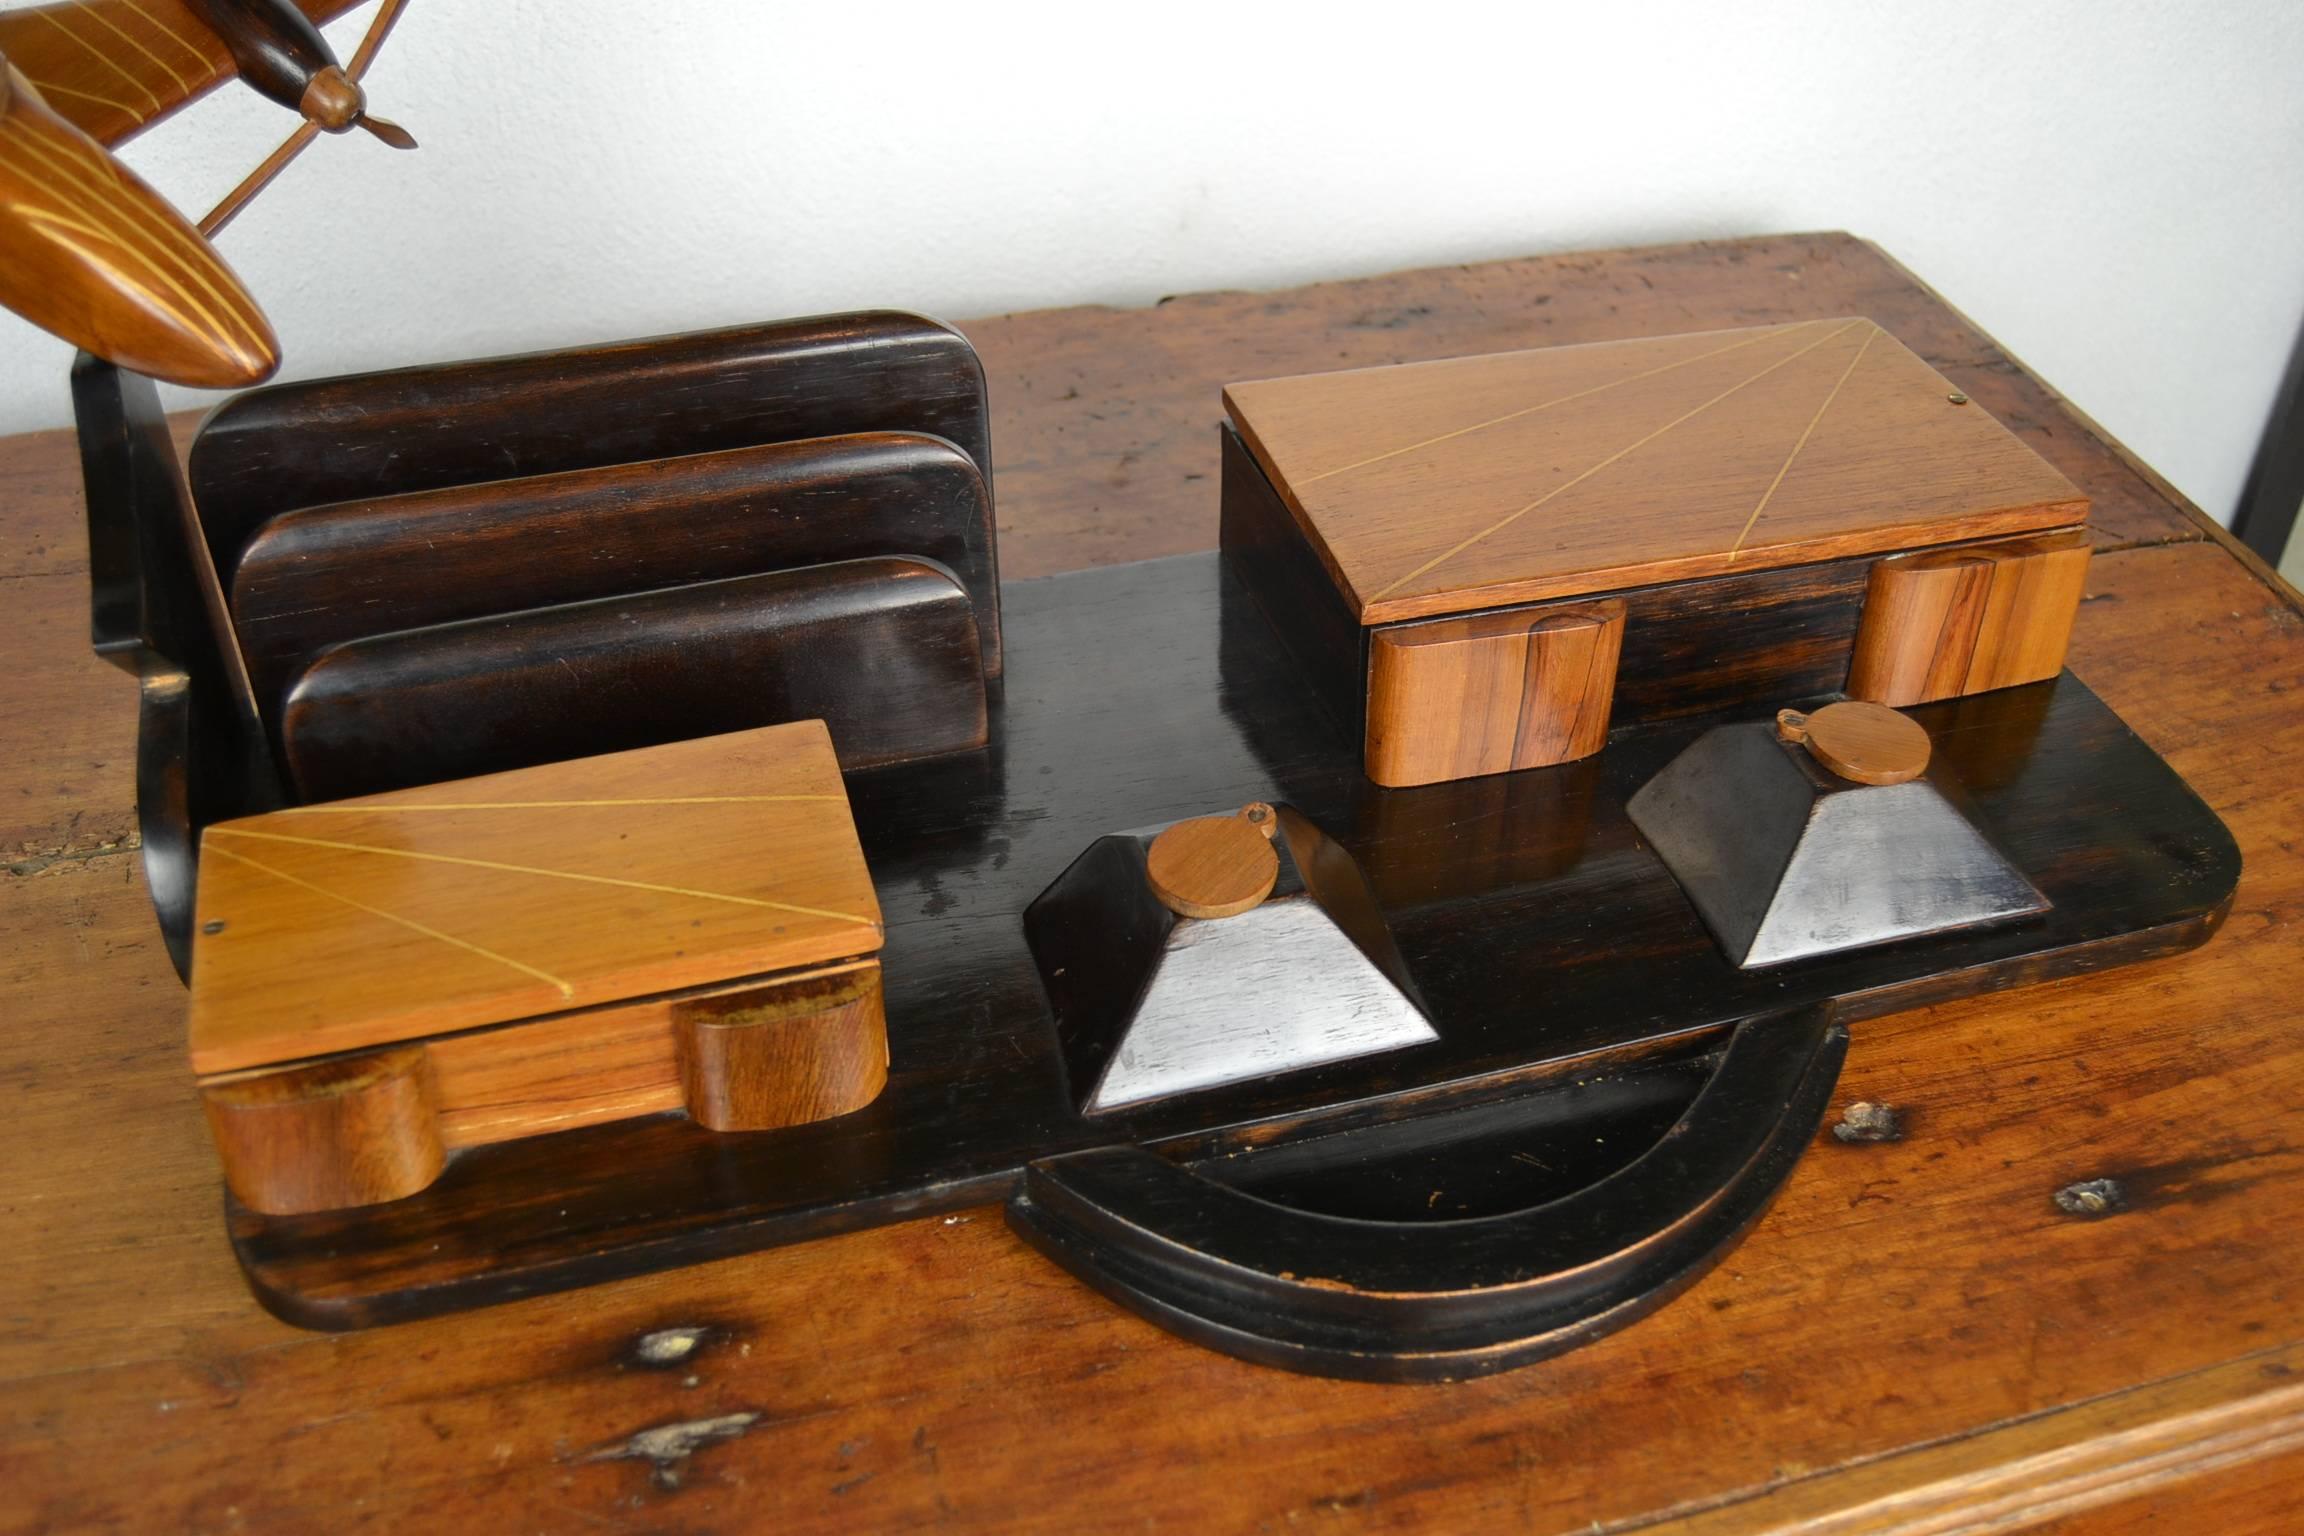 Stylish Art Deco wooden desk set with airplane on top.
Handmade big desk set with letter holder, two inkwells, two storage boxes and plane on top which can be put in different positions.
Nice details and use of inlaid wood.
Awesome desk accessory,